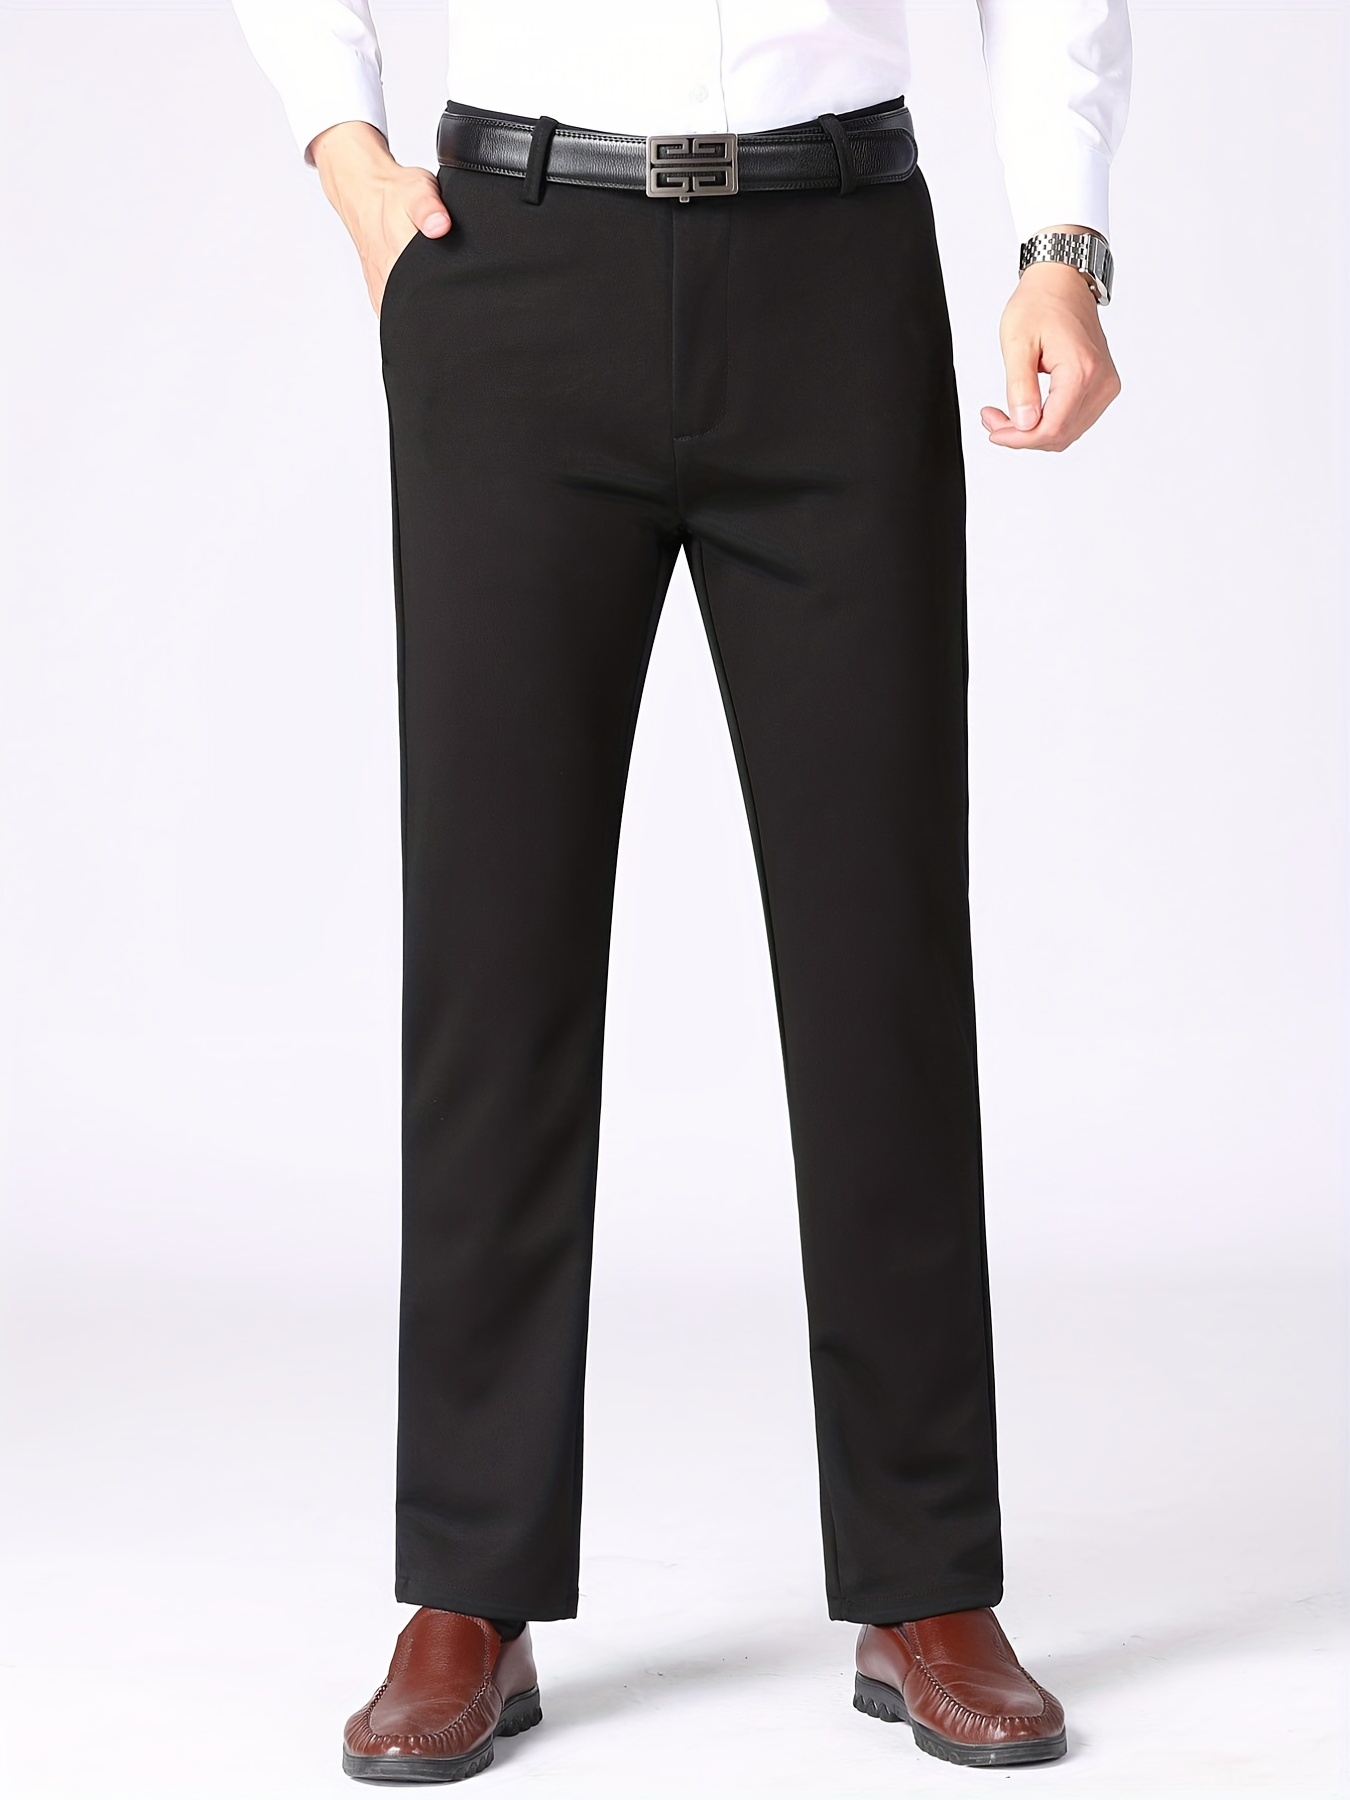 Buy Black Trousers & Pants for Men by INDEPENDENCE Online | Ajio.com-seedfund.vn